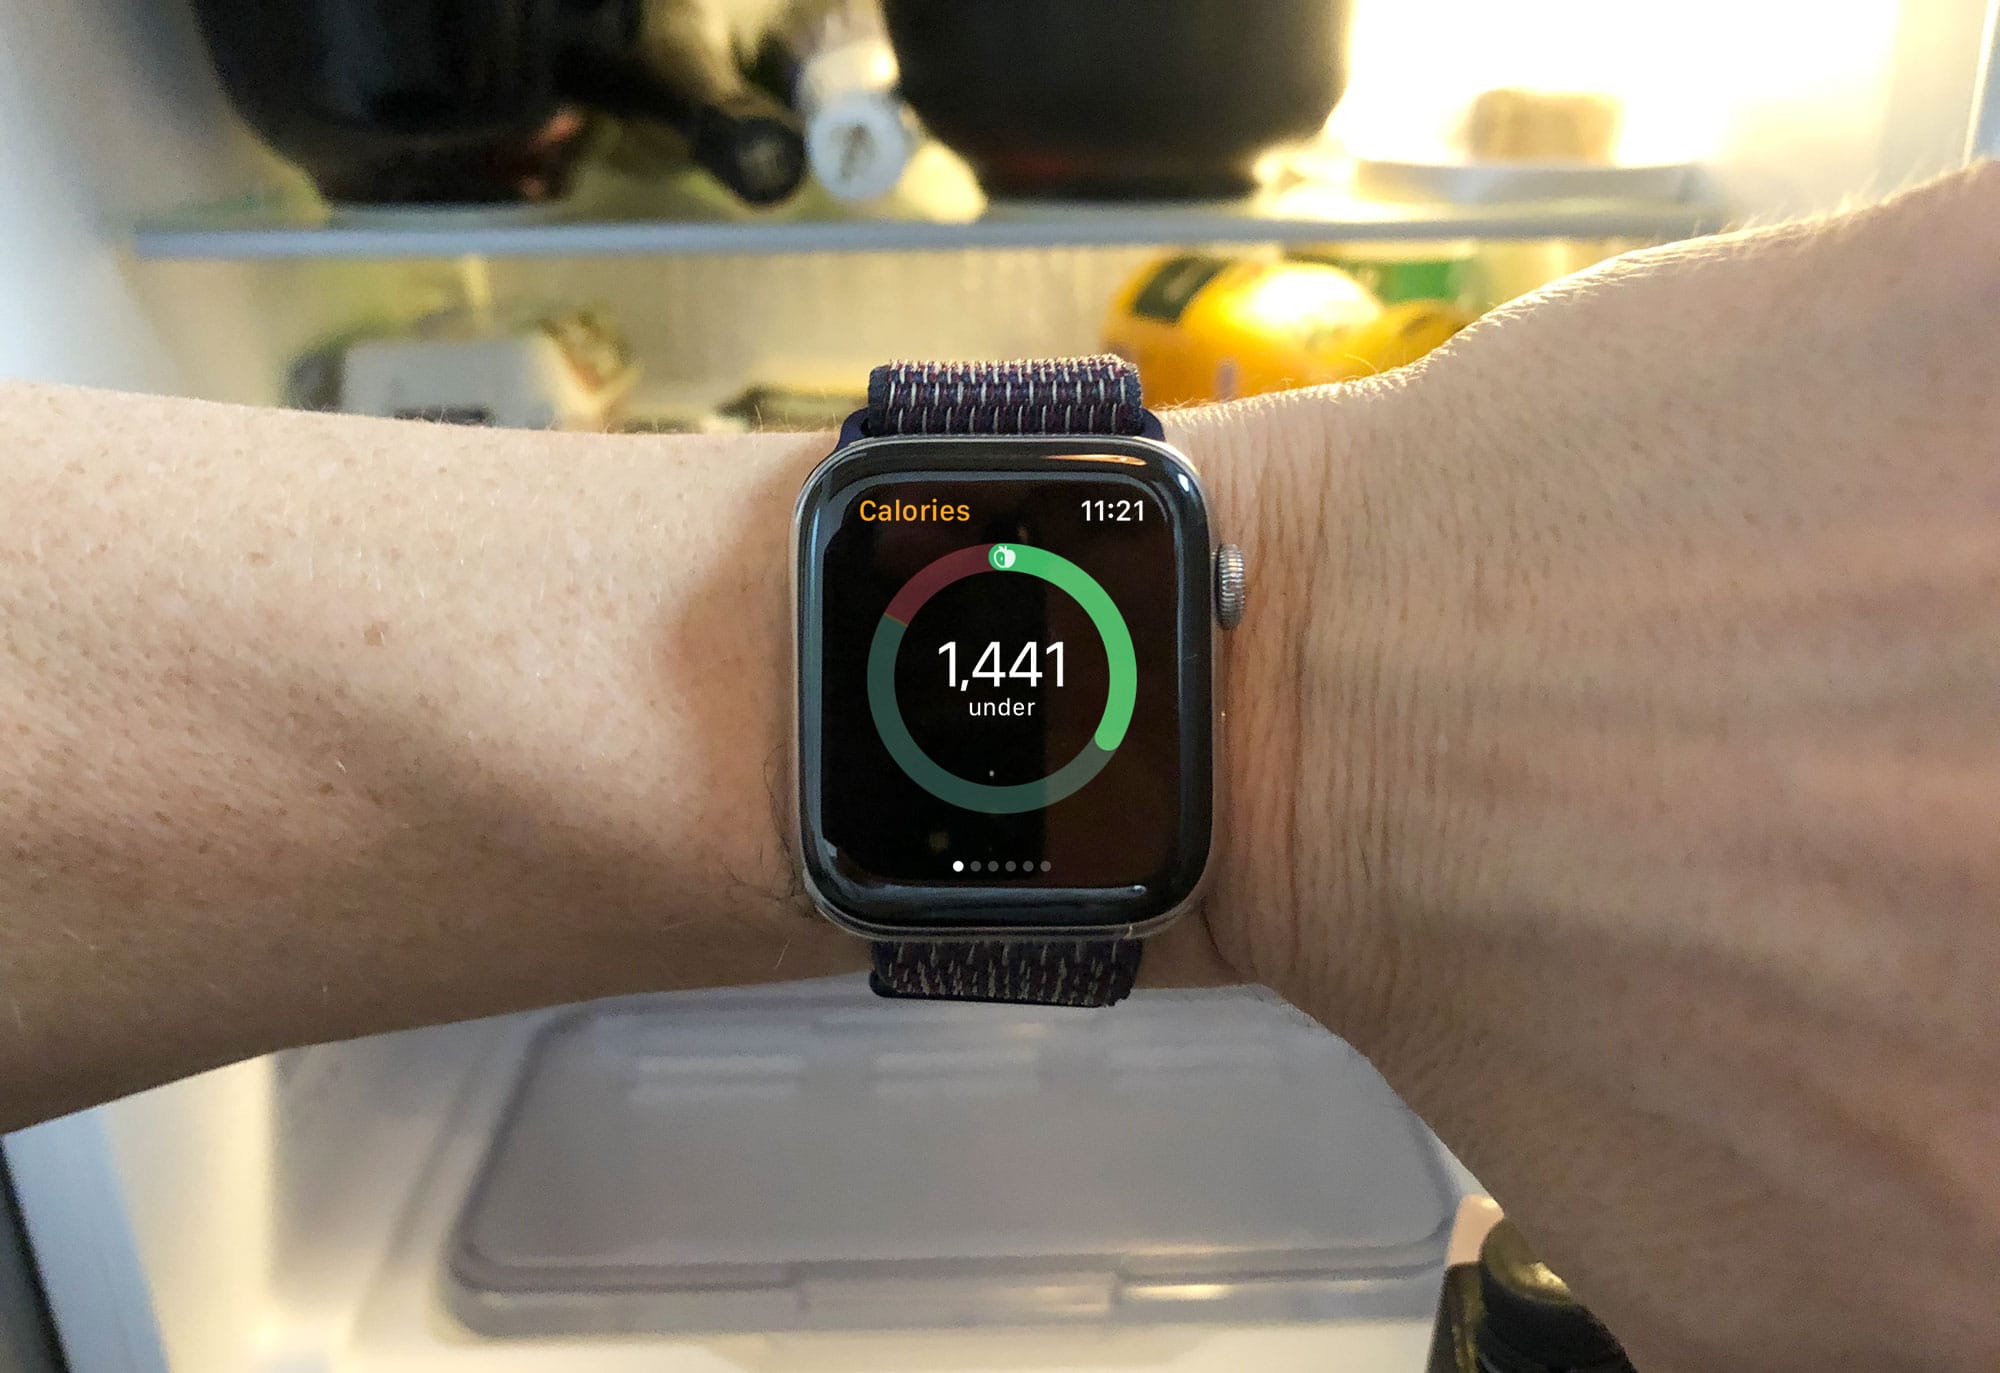 The Lose It watch app tells you how many calories you have left for the day.